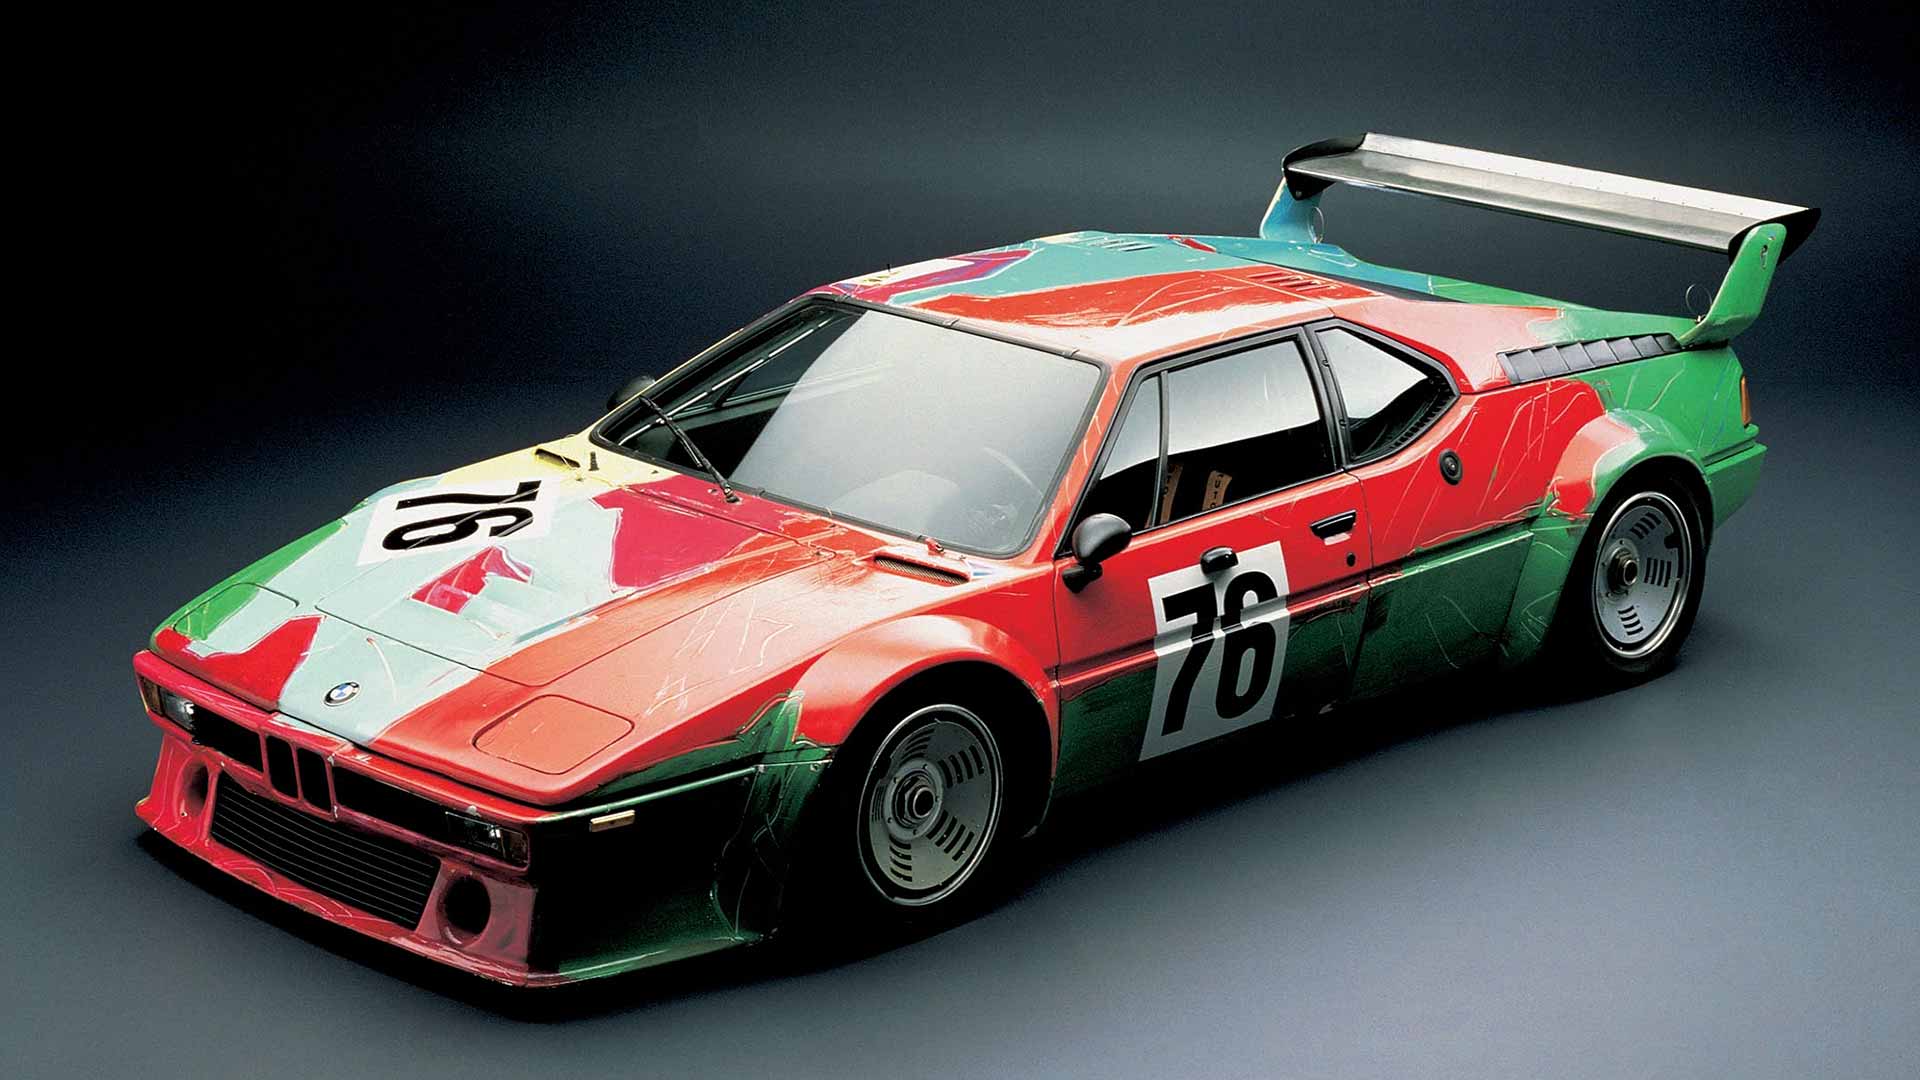 1979 BMW M1 Group 4 Racecar painted by Andy Warhol